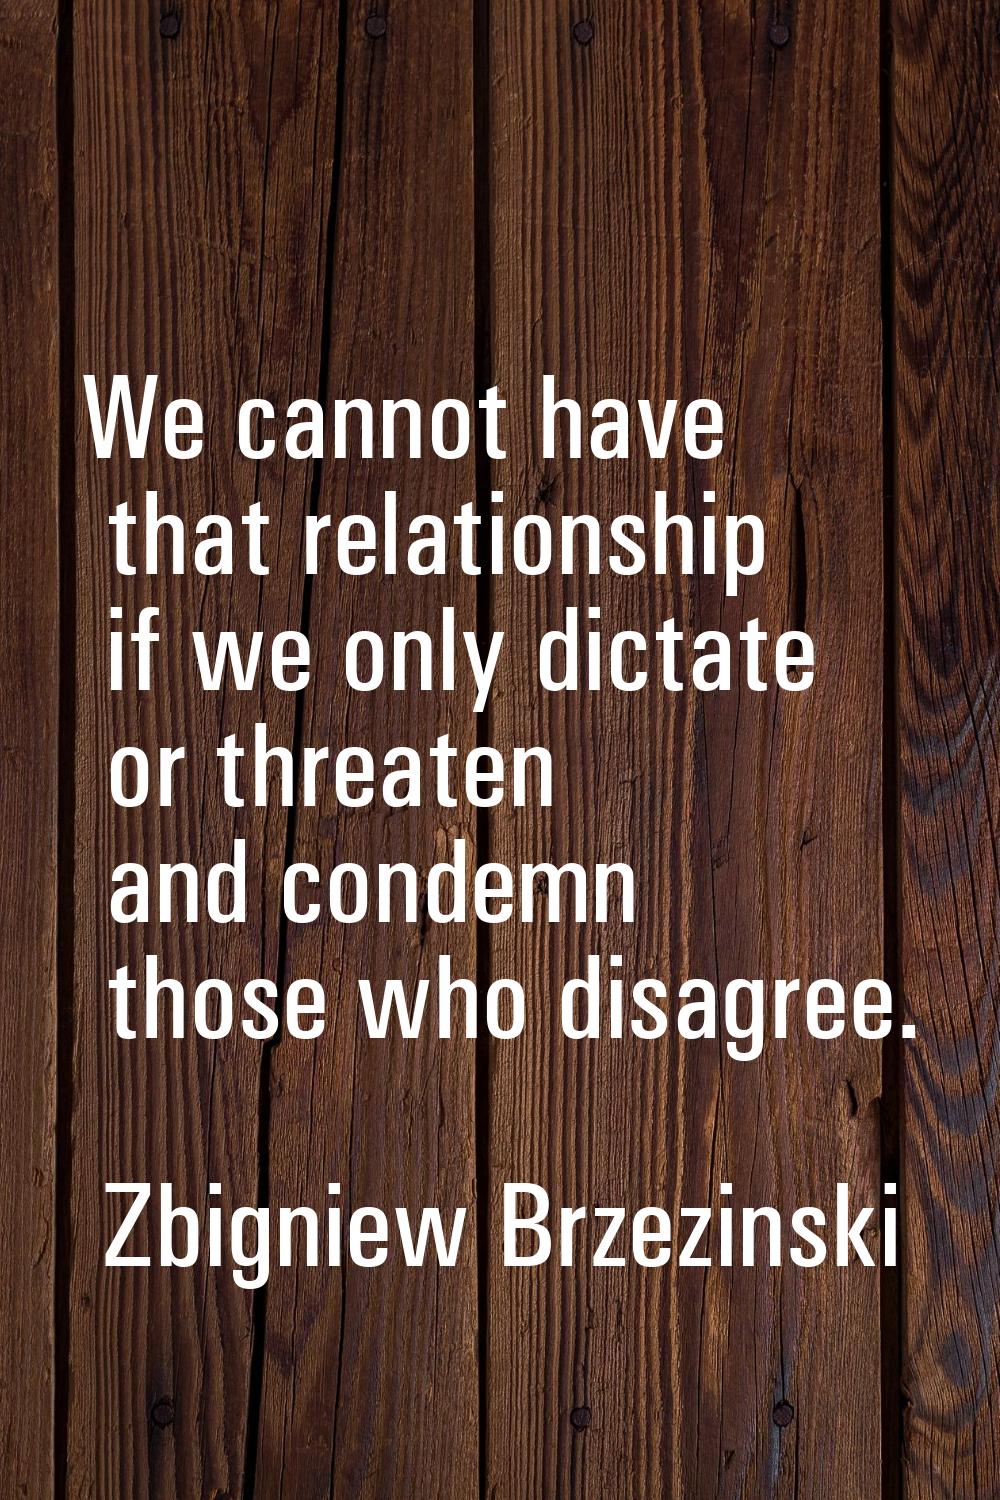 We cannot have that relationship if we only dictate or threaten and condemn those who disagree.